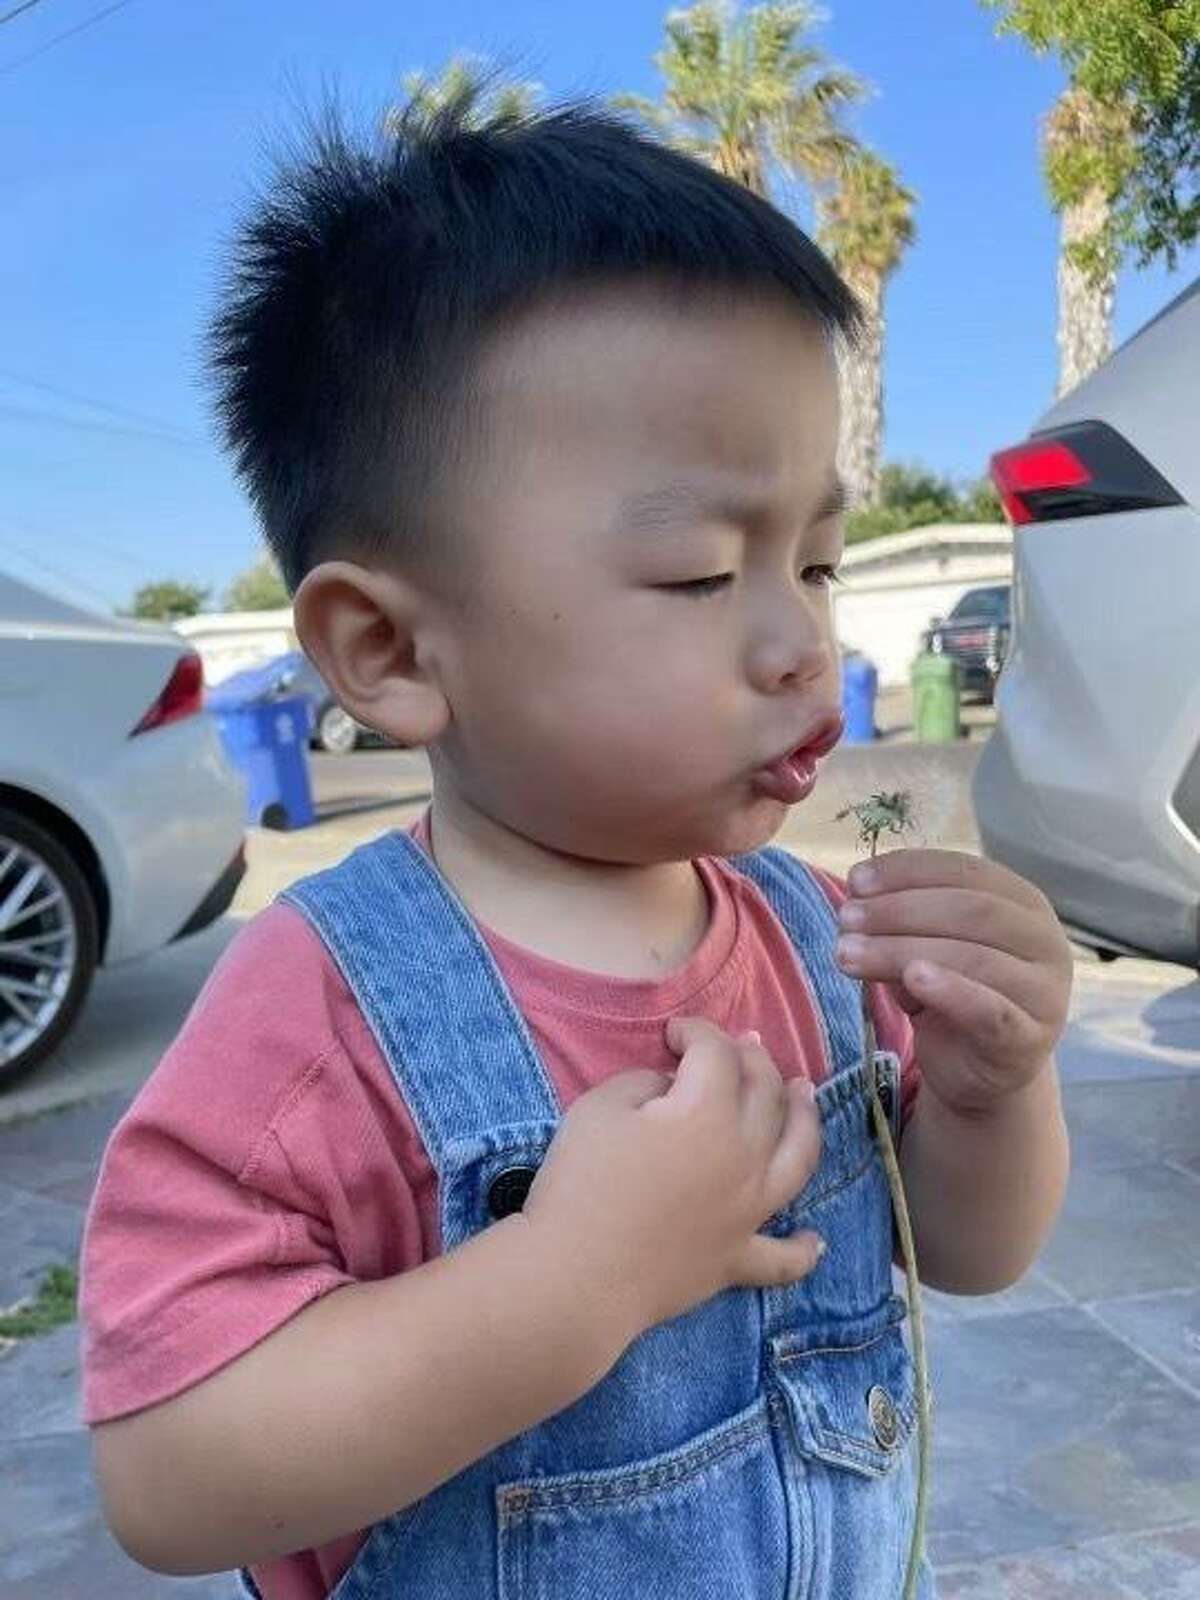 Jasper Wu, a 23-month-old toddler from Fremont, was killed by a stray bullet on Interstate 880 in Oakland, Calif.